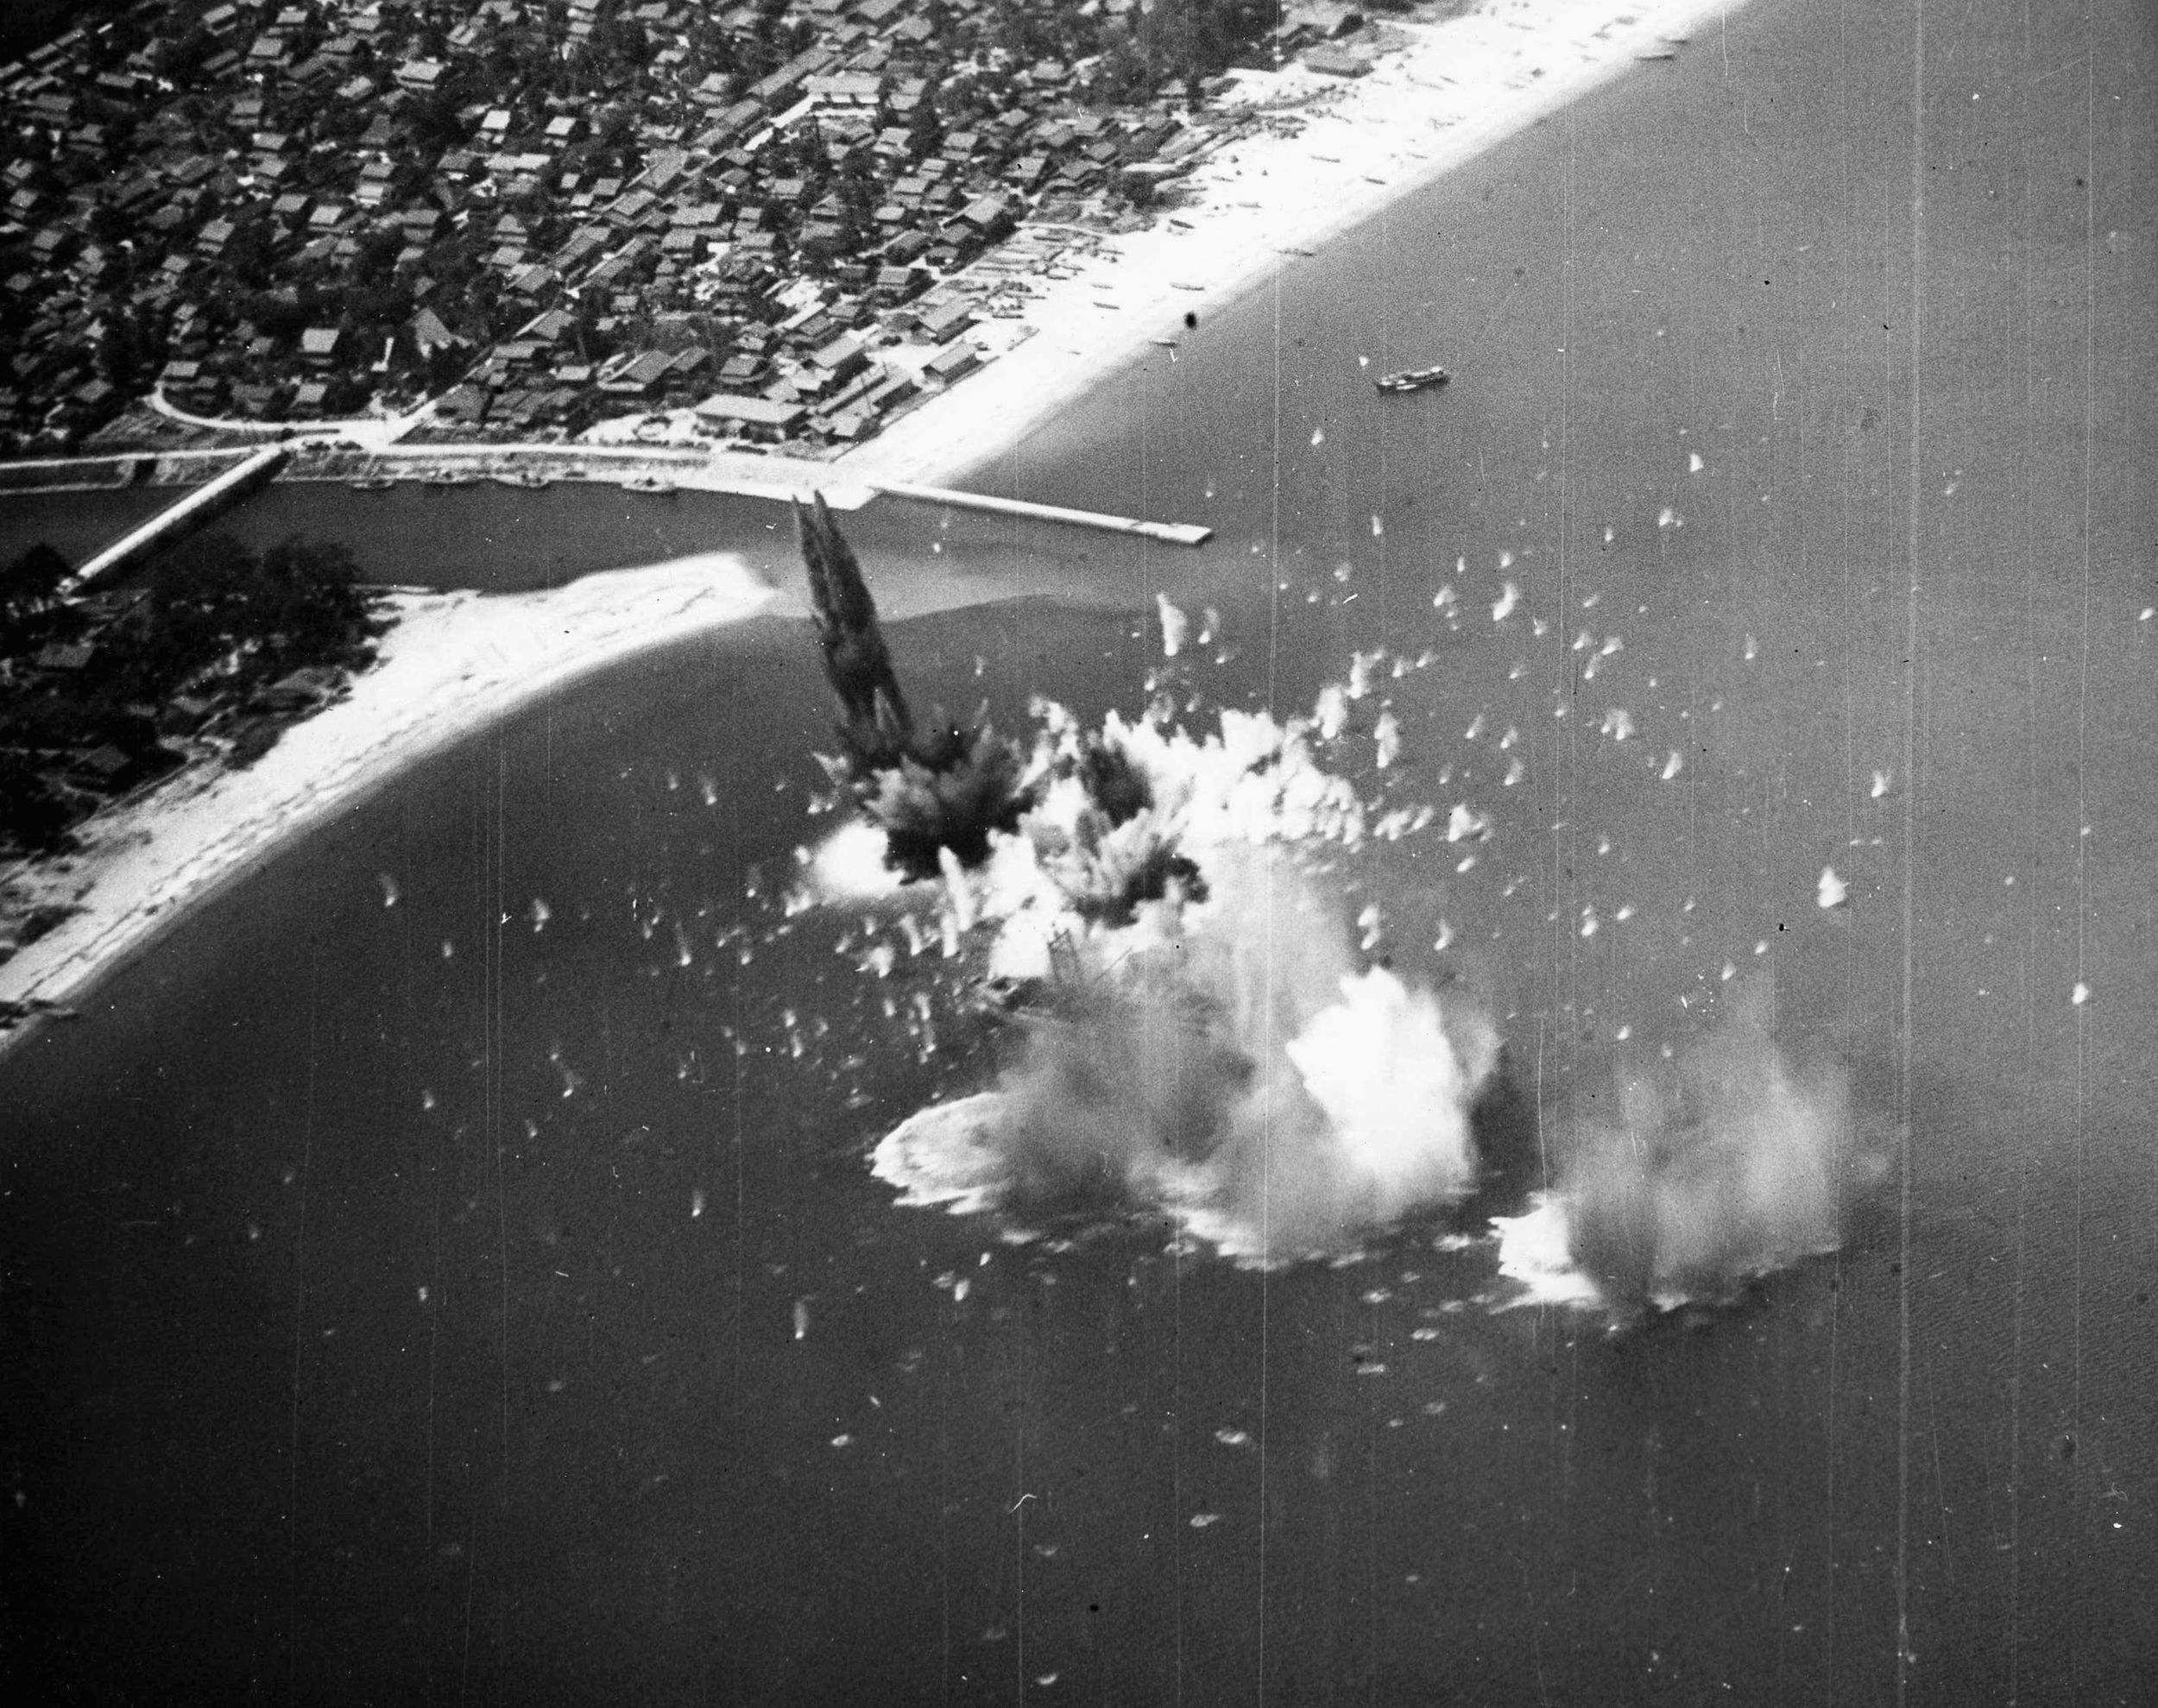 Moments after the left photo was taken, the same Japanese ship explodes following repeated hits by bombs from American carrier-based aircraft.